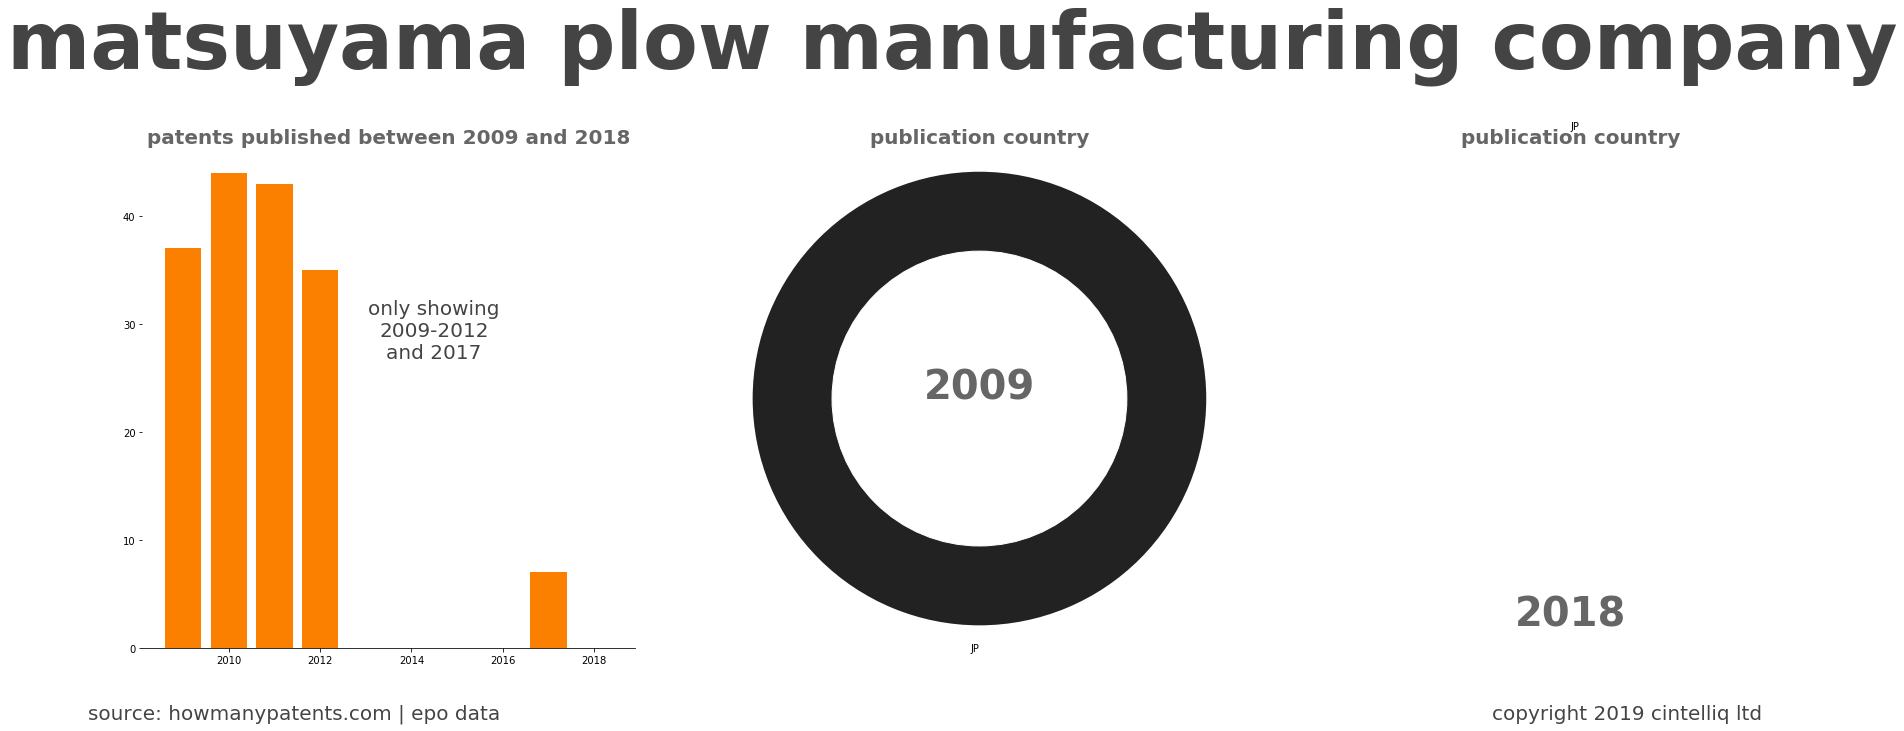 summary of patents for Matsuyama Plow Manufacturing Company